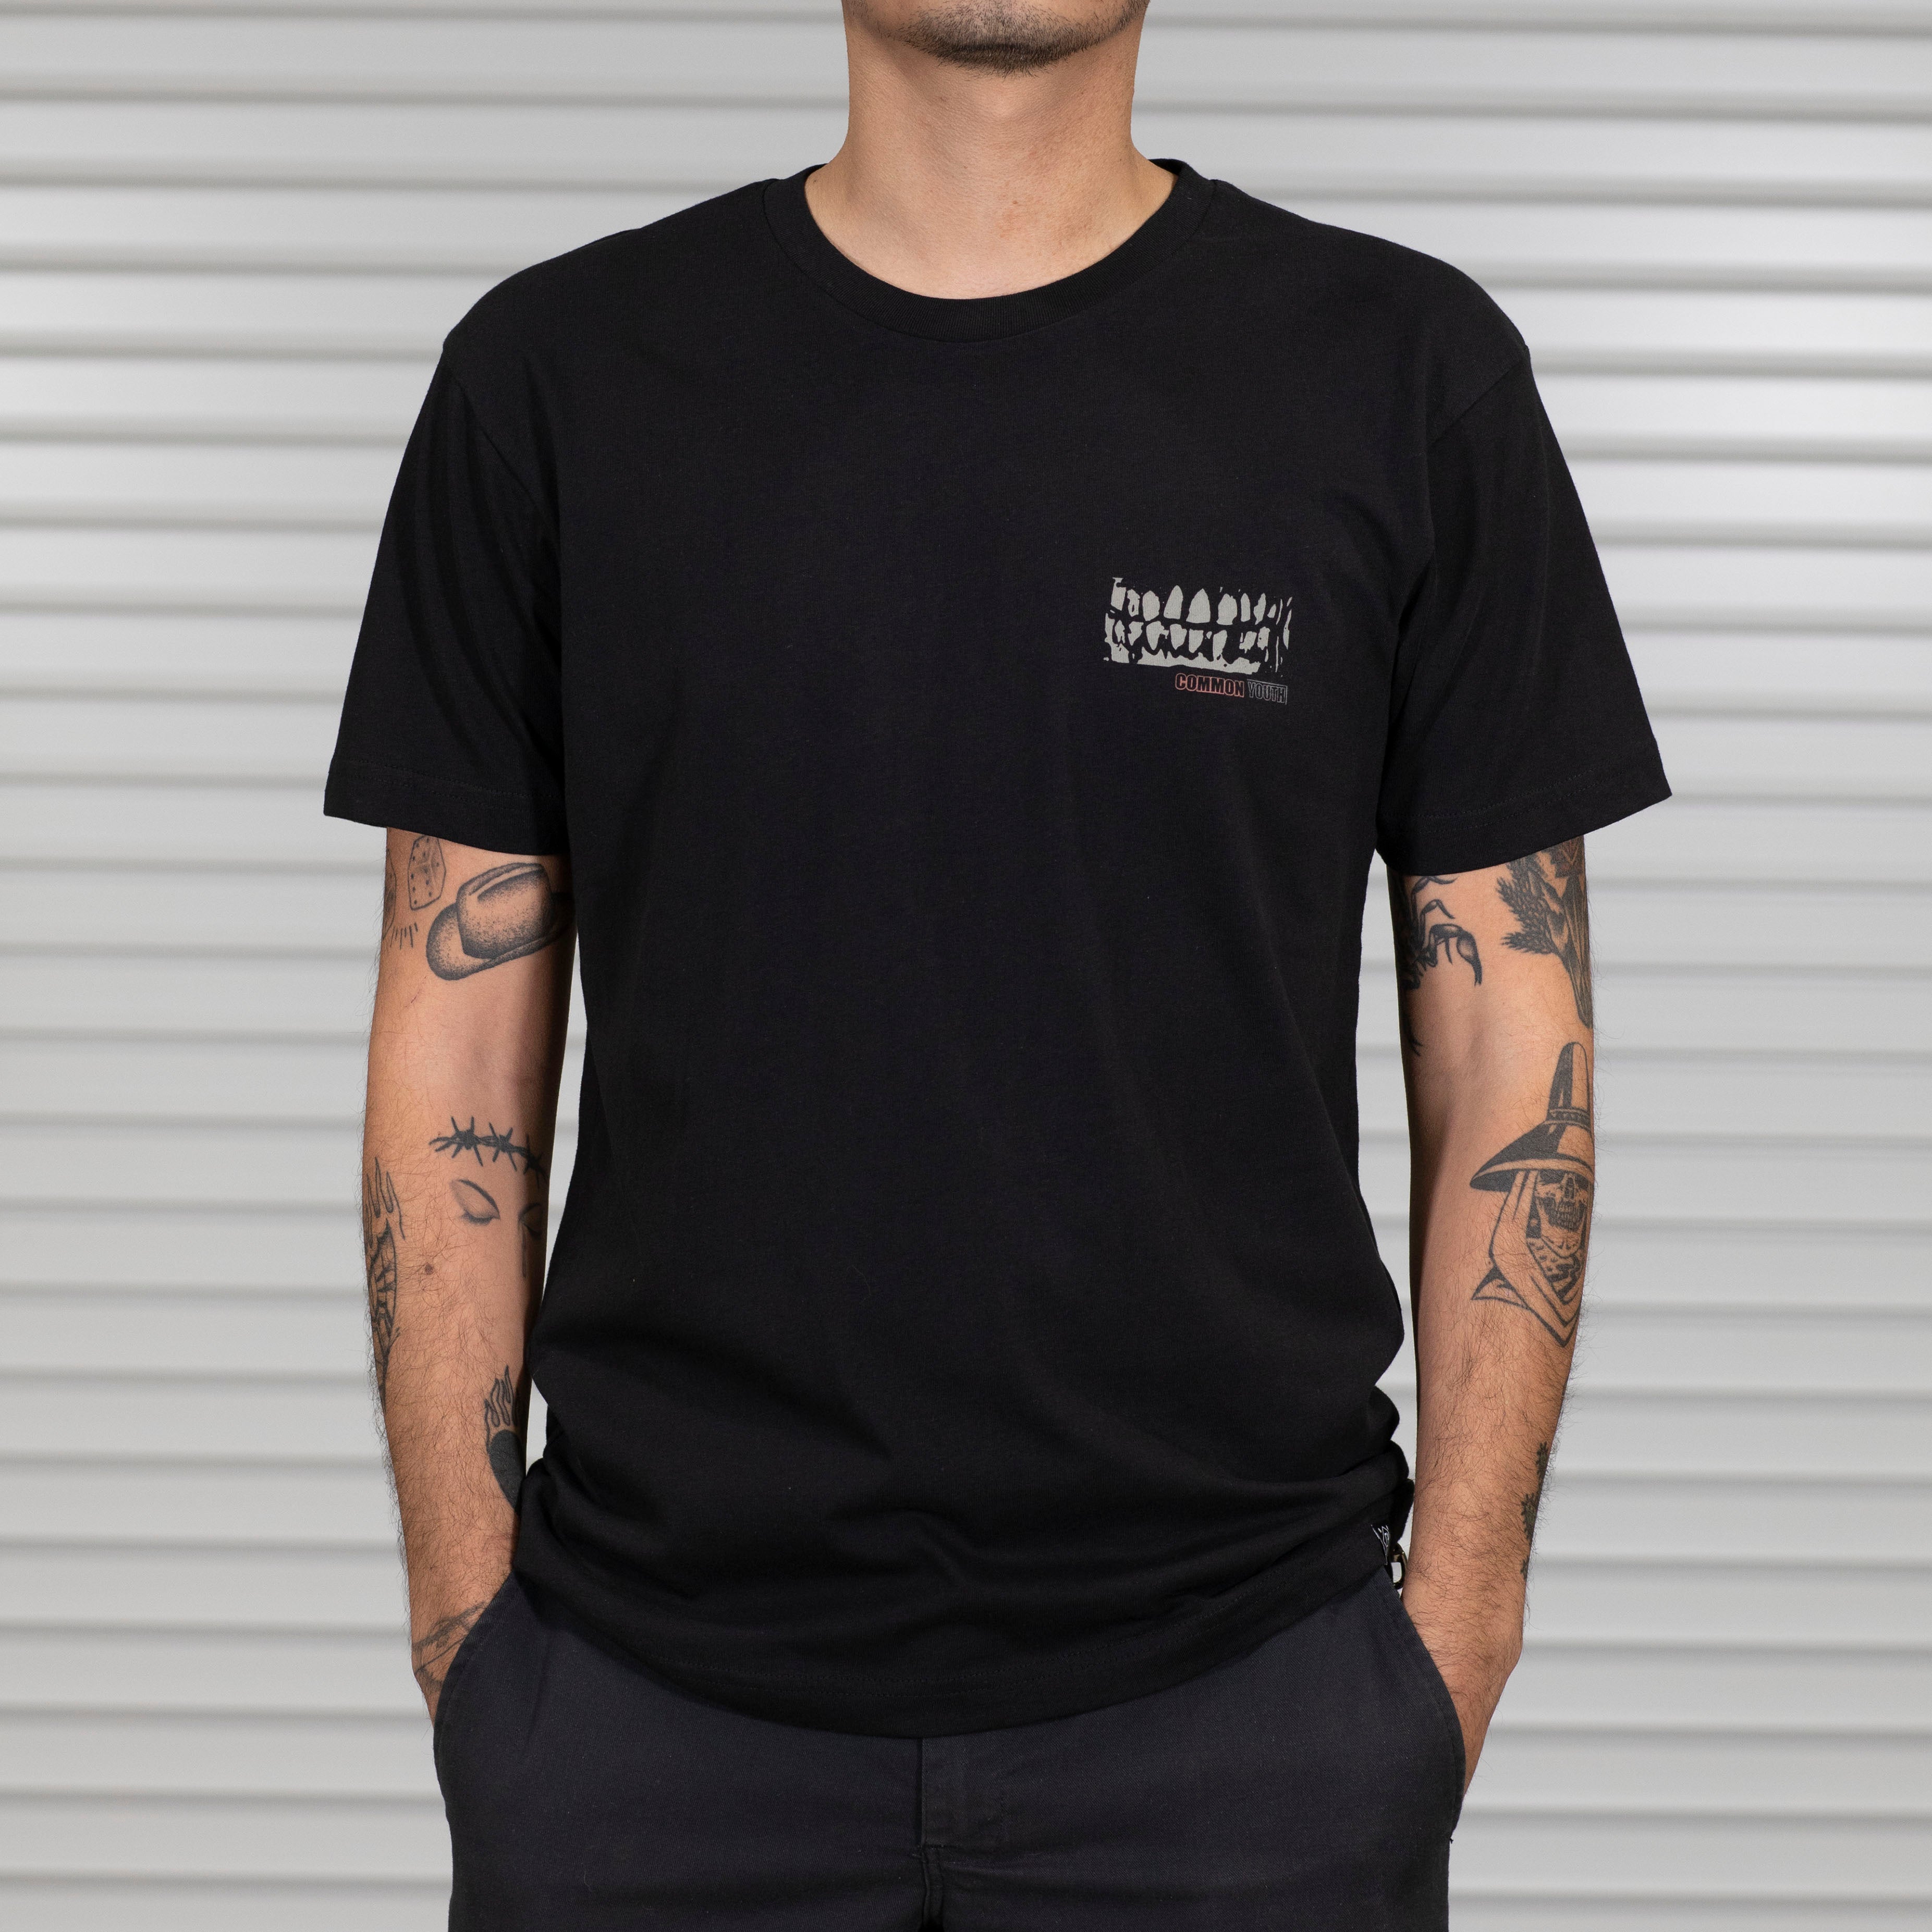 RED EYE SS - commonyouthbrand